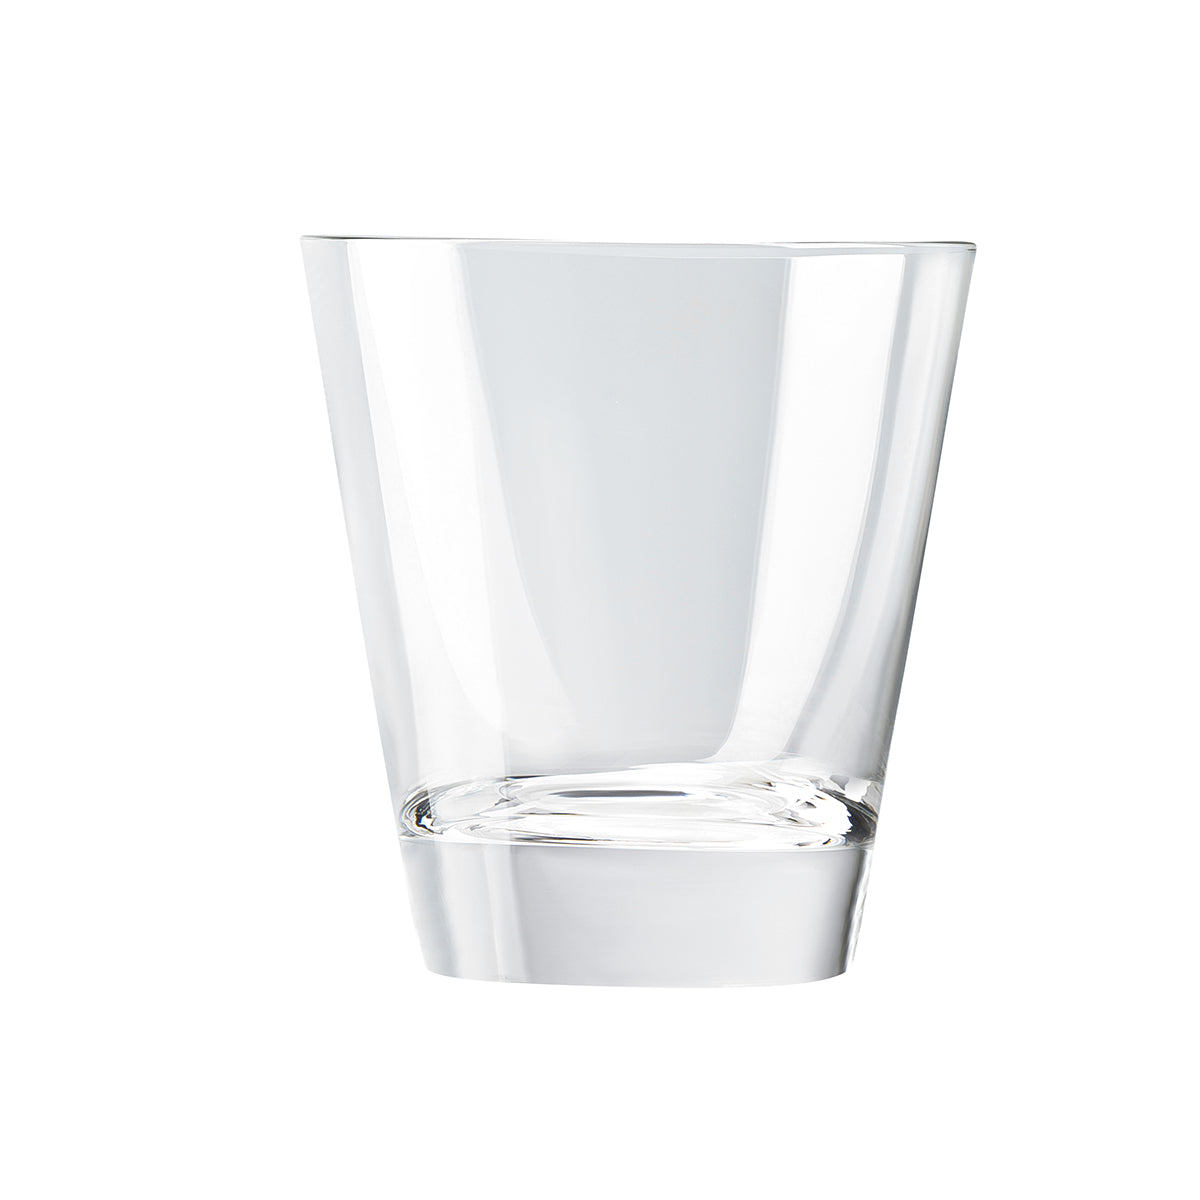 Rosenthal DiVino Double Old Fashioned - 8 oz - Boxed Set of 6